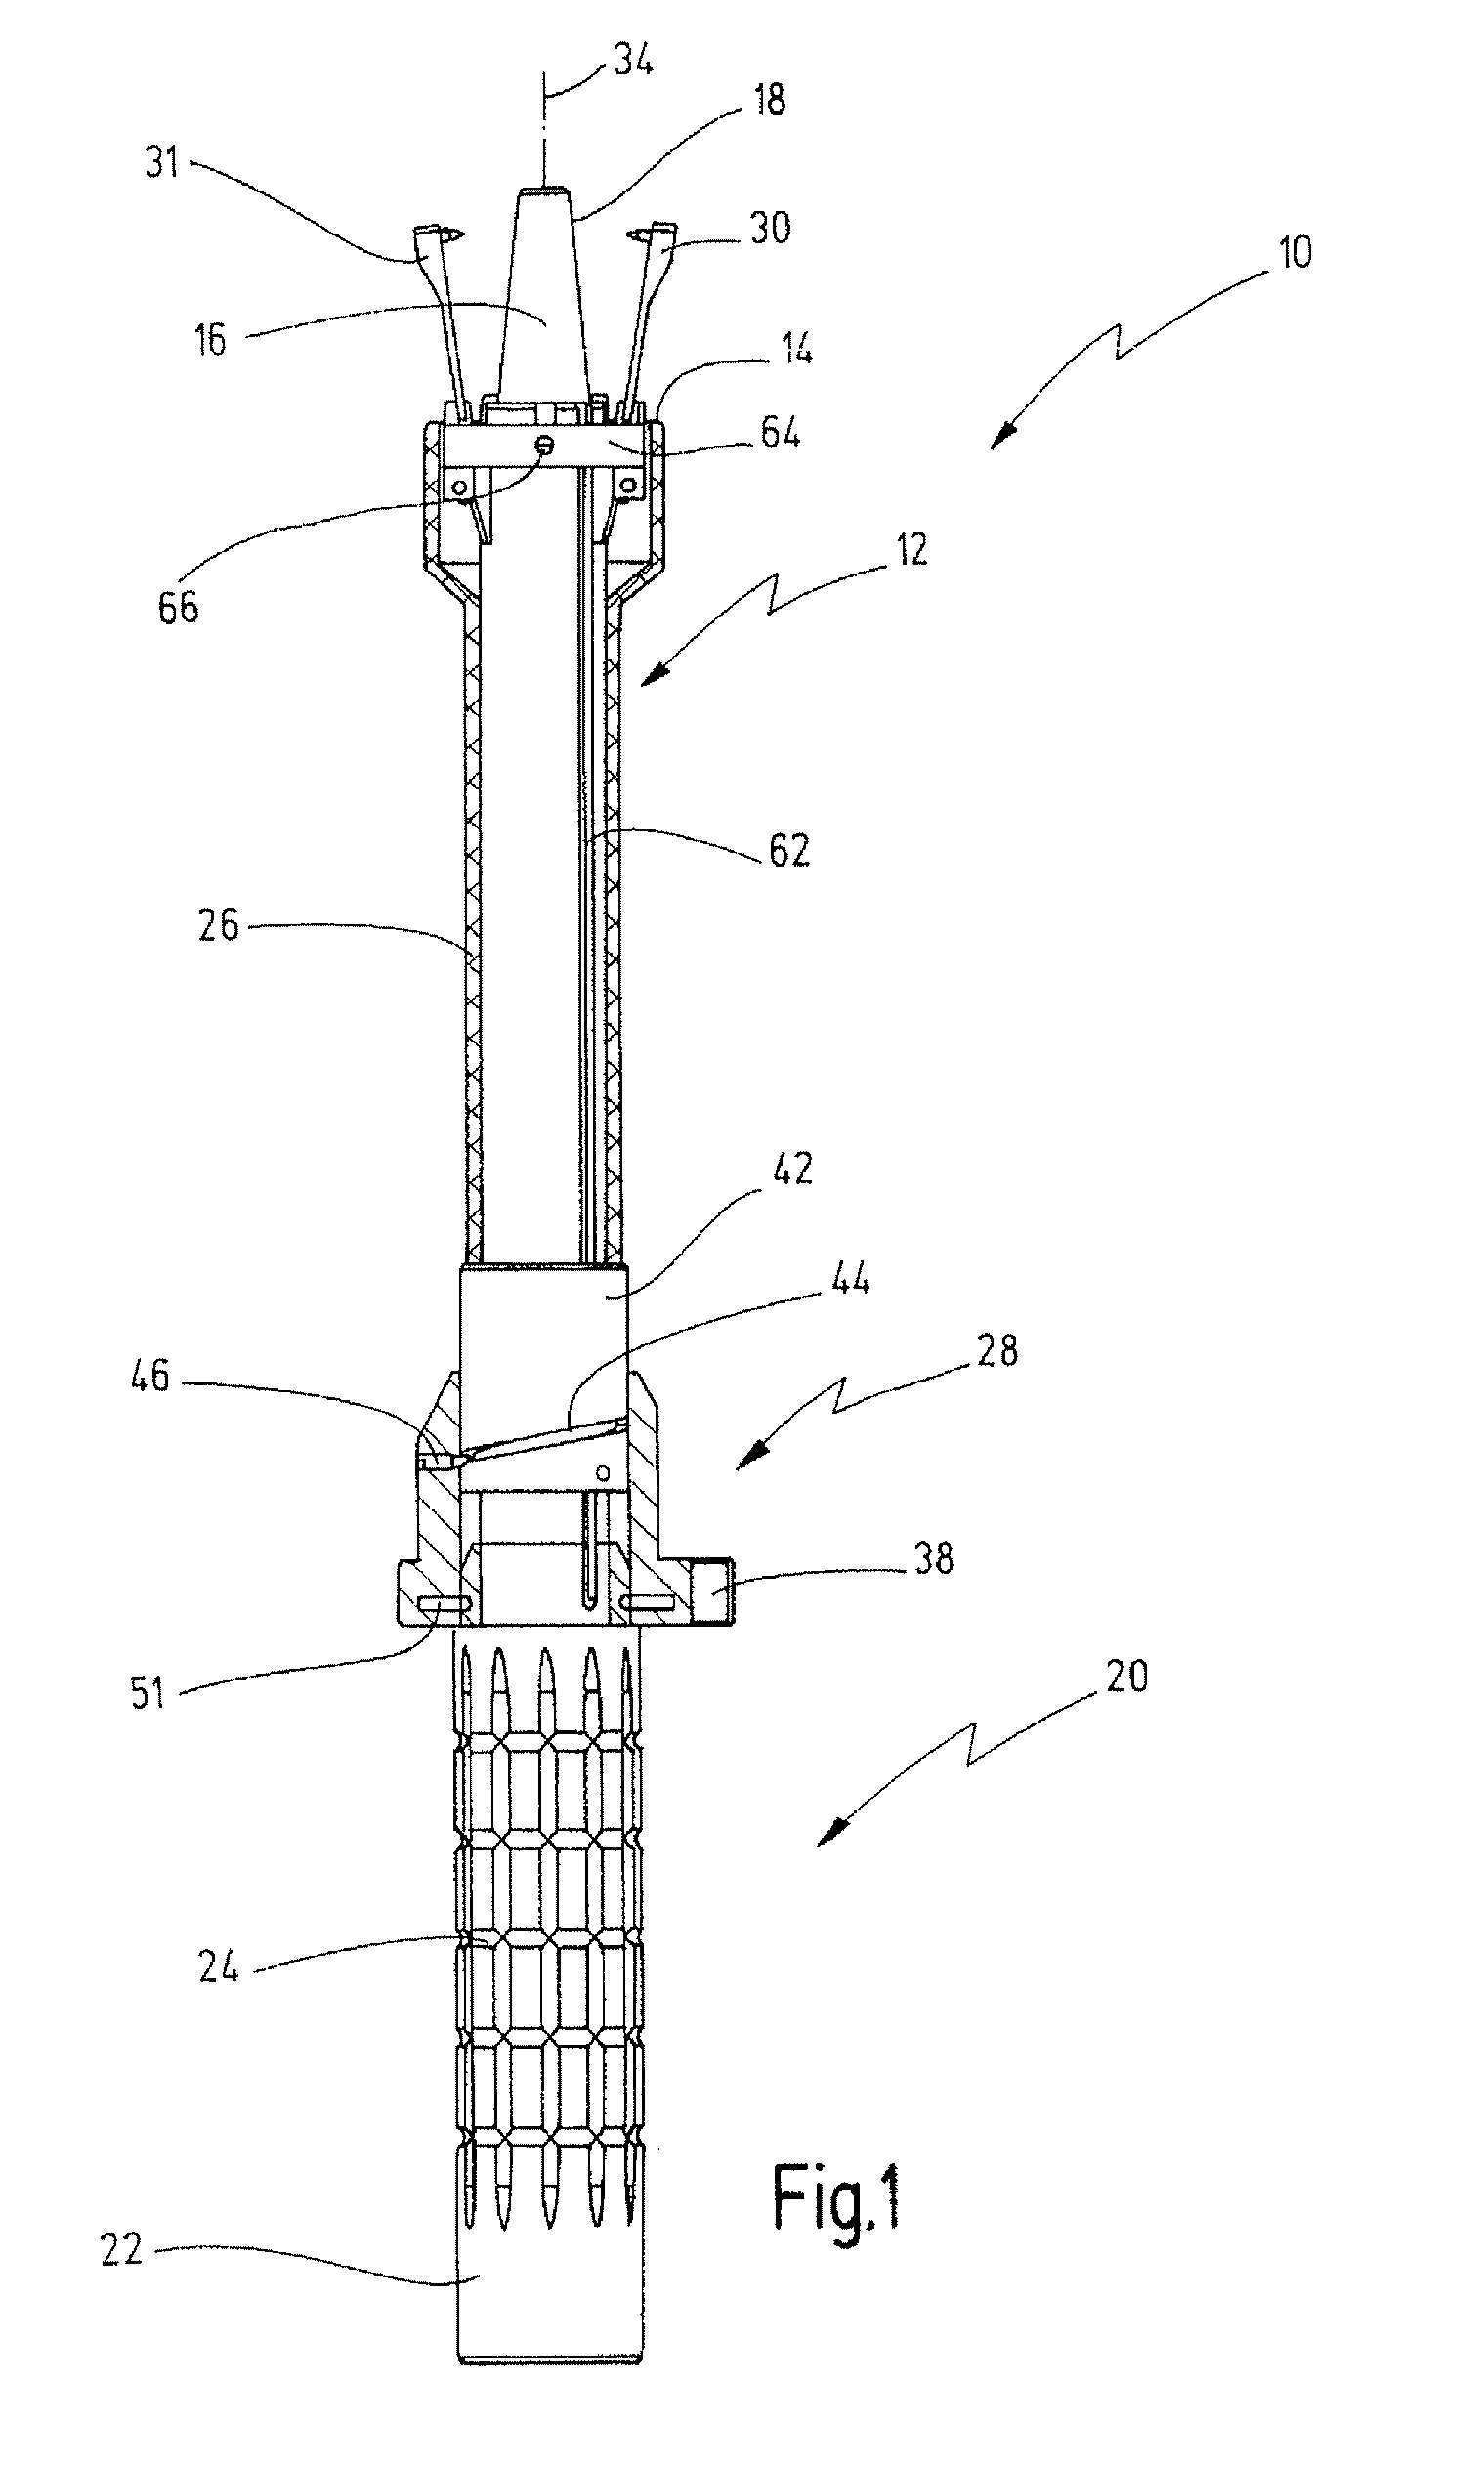 Device for performing examinations and surgical interventions on the uterus